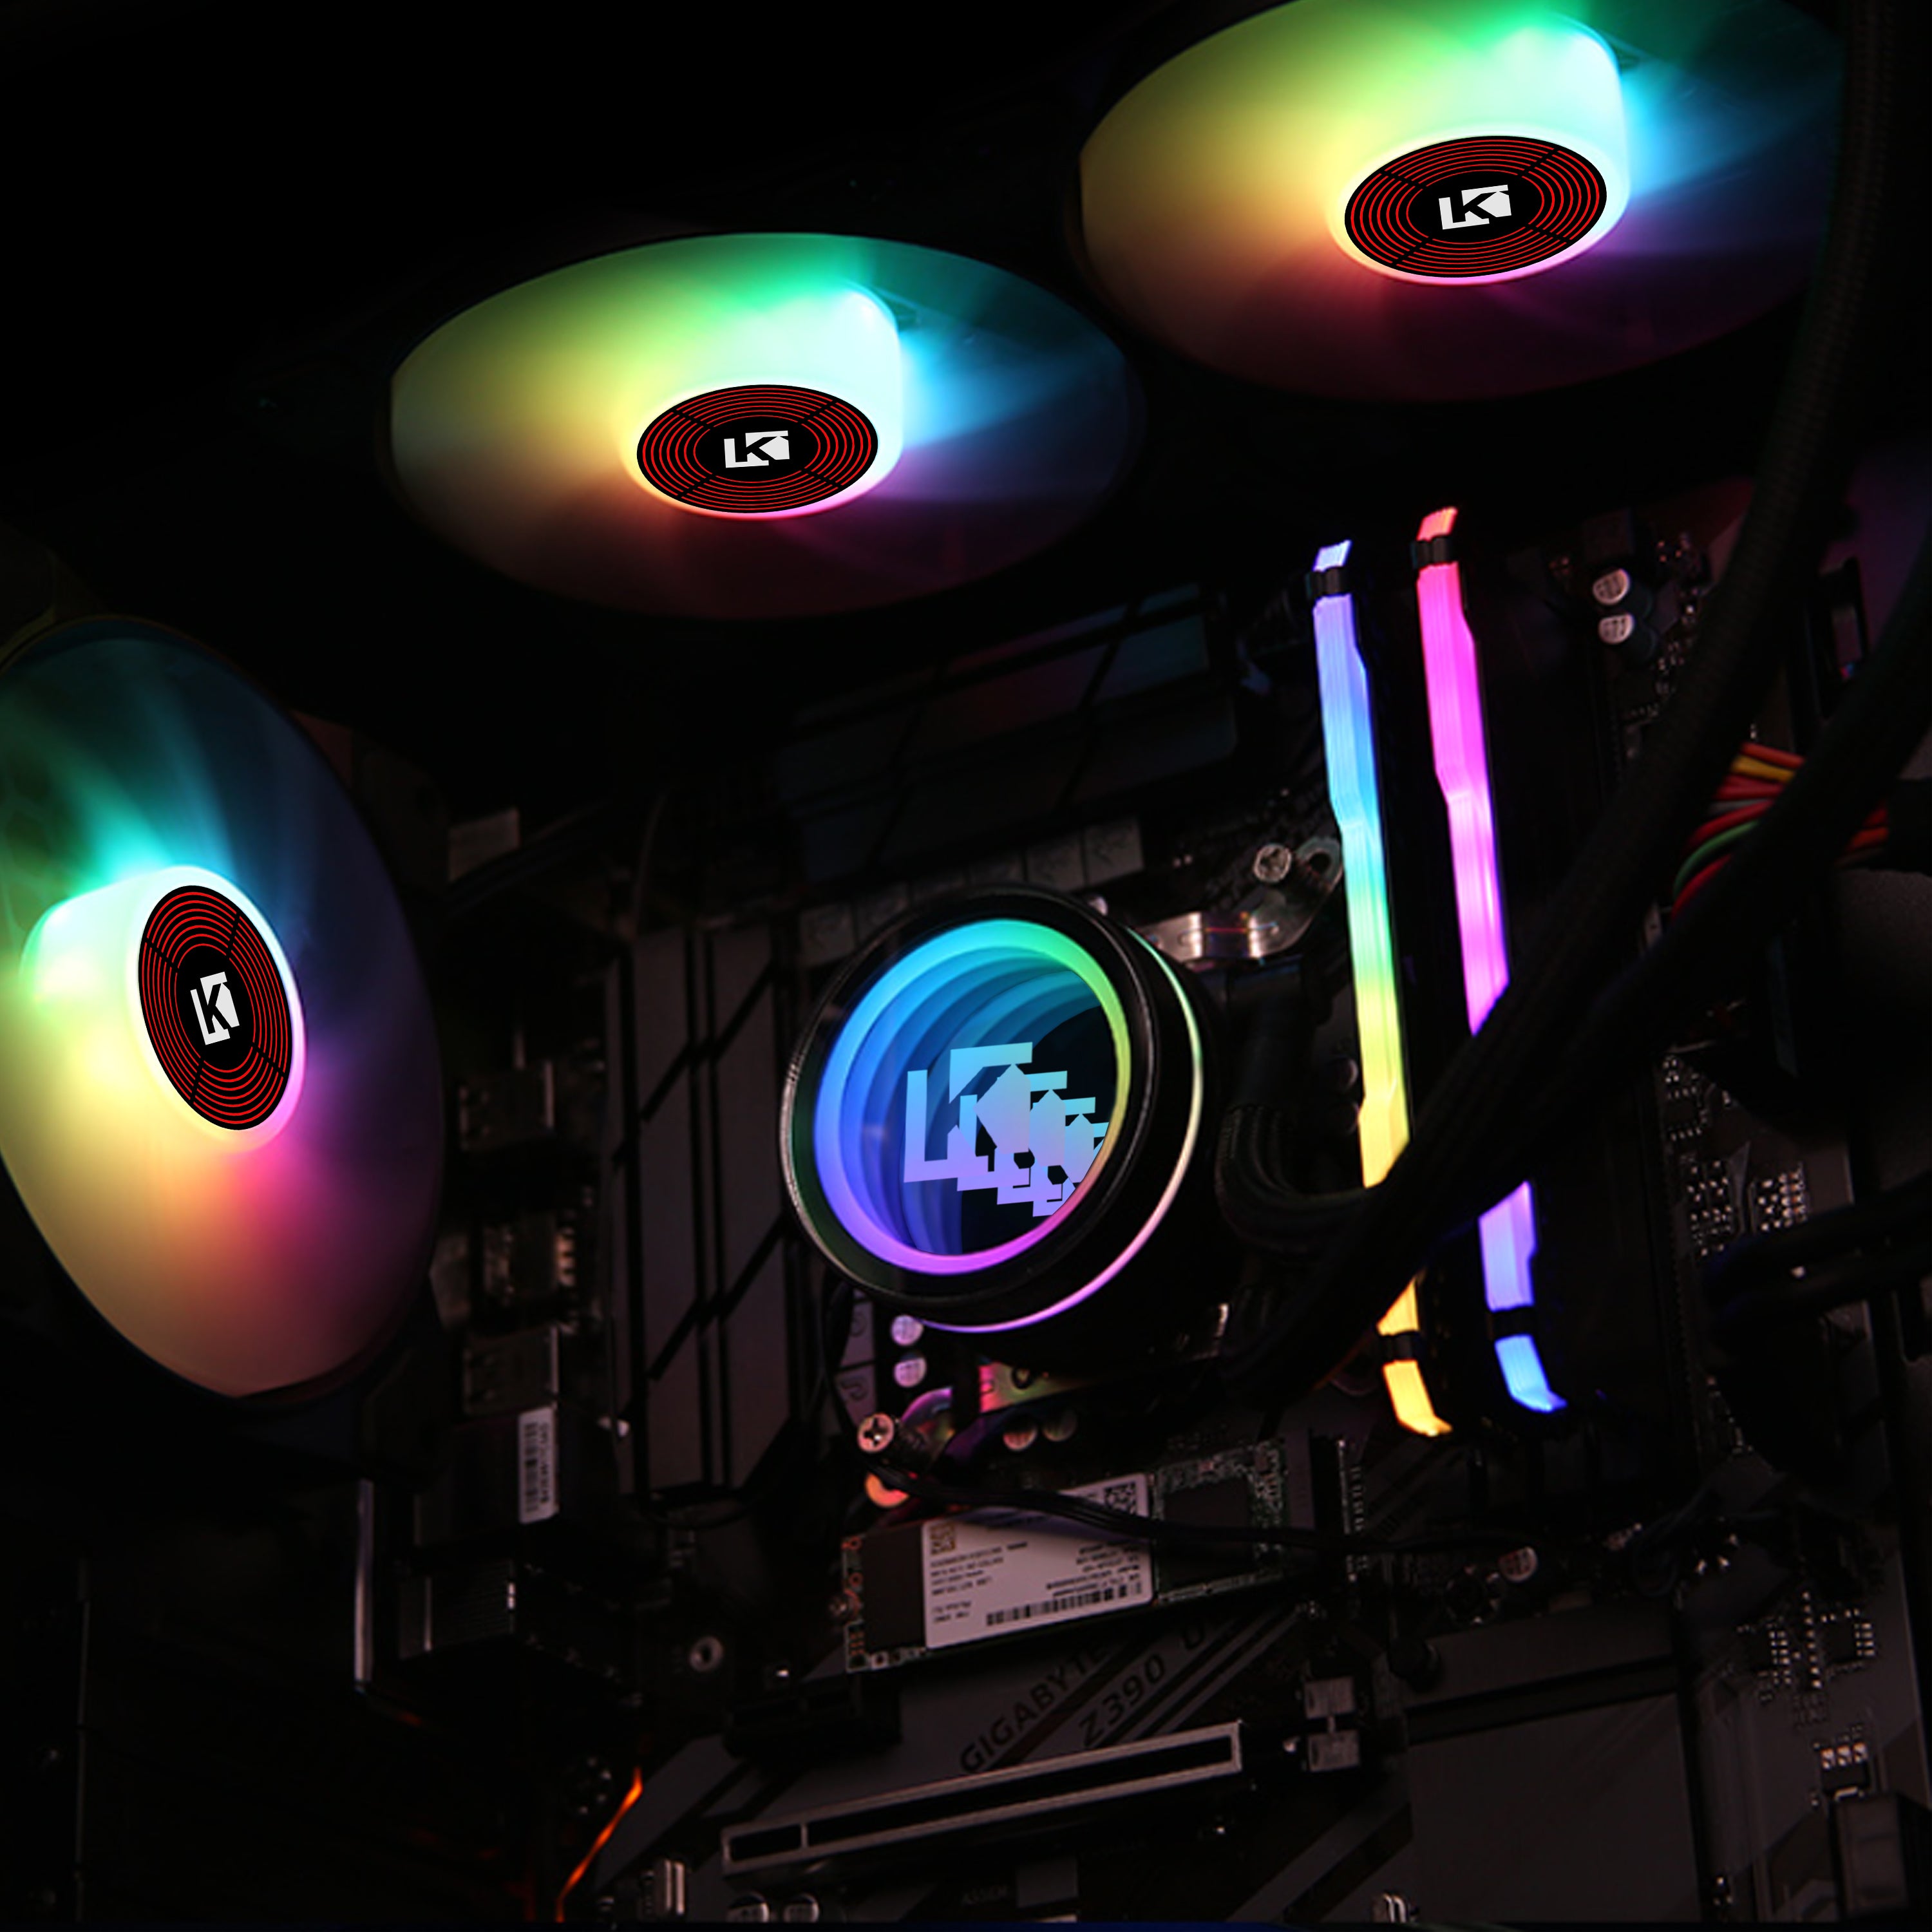 KEDIERS 240mm AIO RGB CPU Liquid Cooler Rotating Infinity Mirror Design RGB Connector 120mm Radiator RGB Fans Motherboard Synchronization and Intelligent Temperature Control